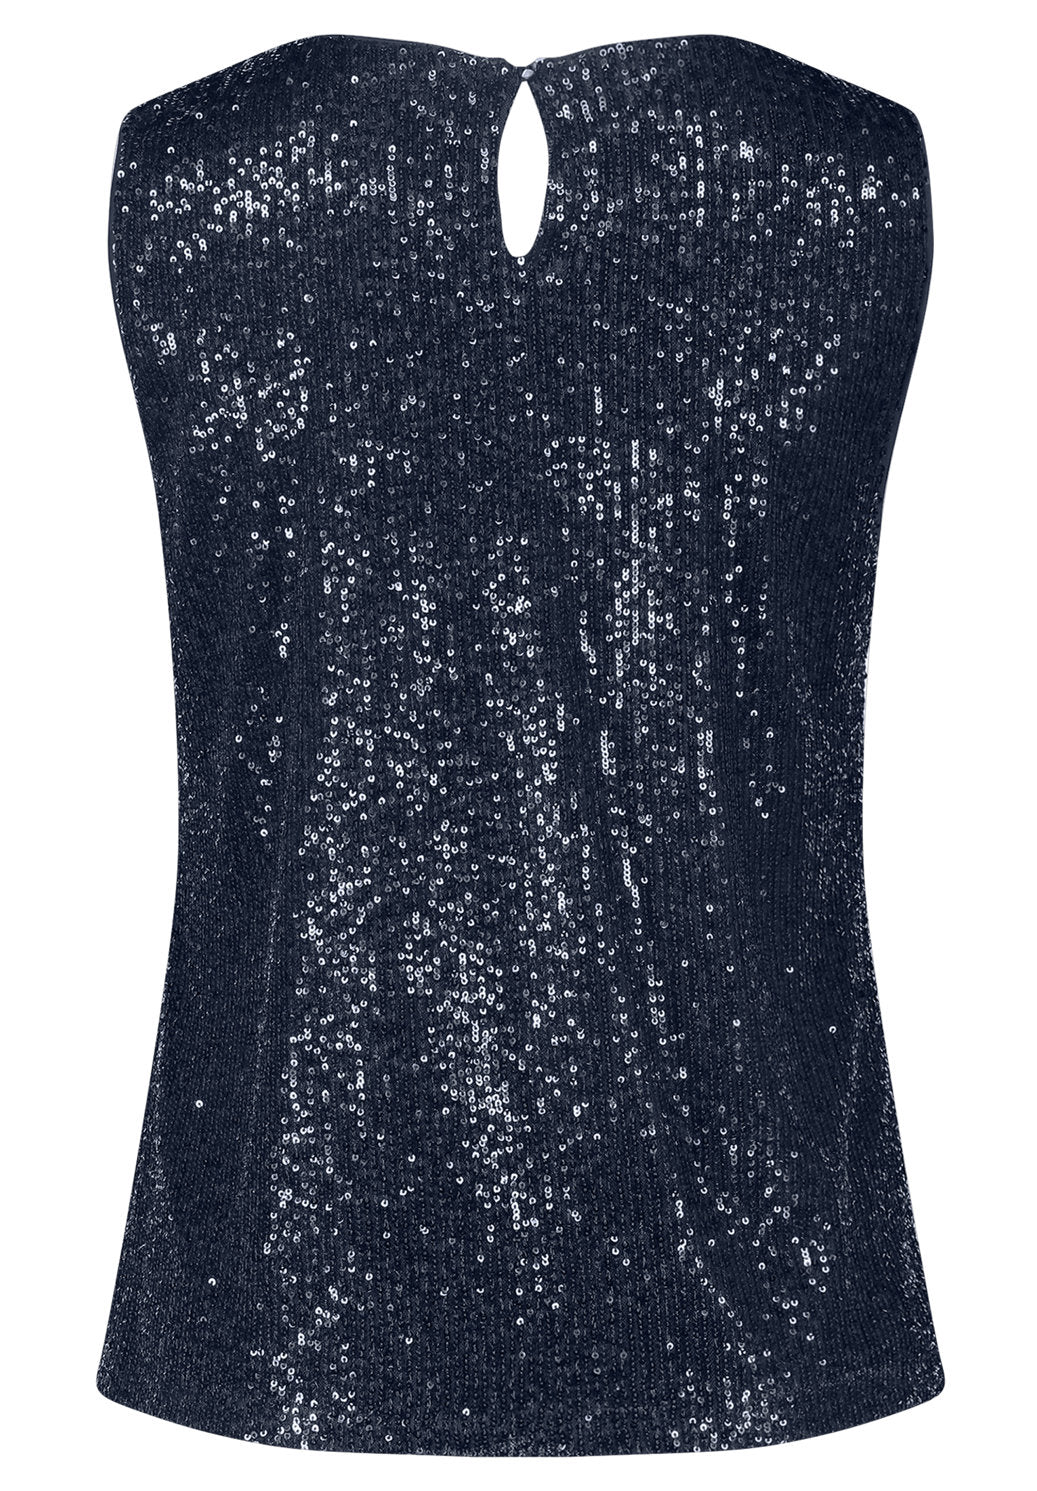 Black Sleeveless Blouse With Sequins_8718 3388_8543_02